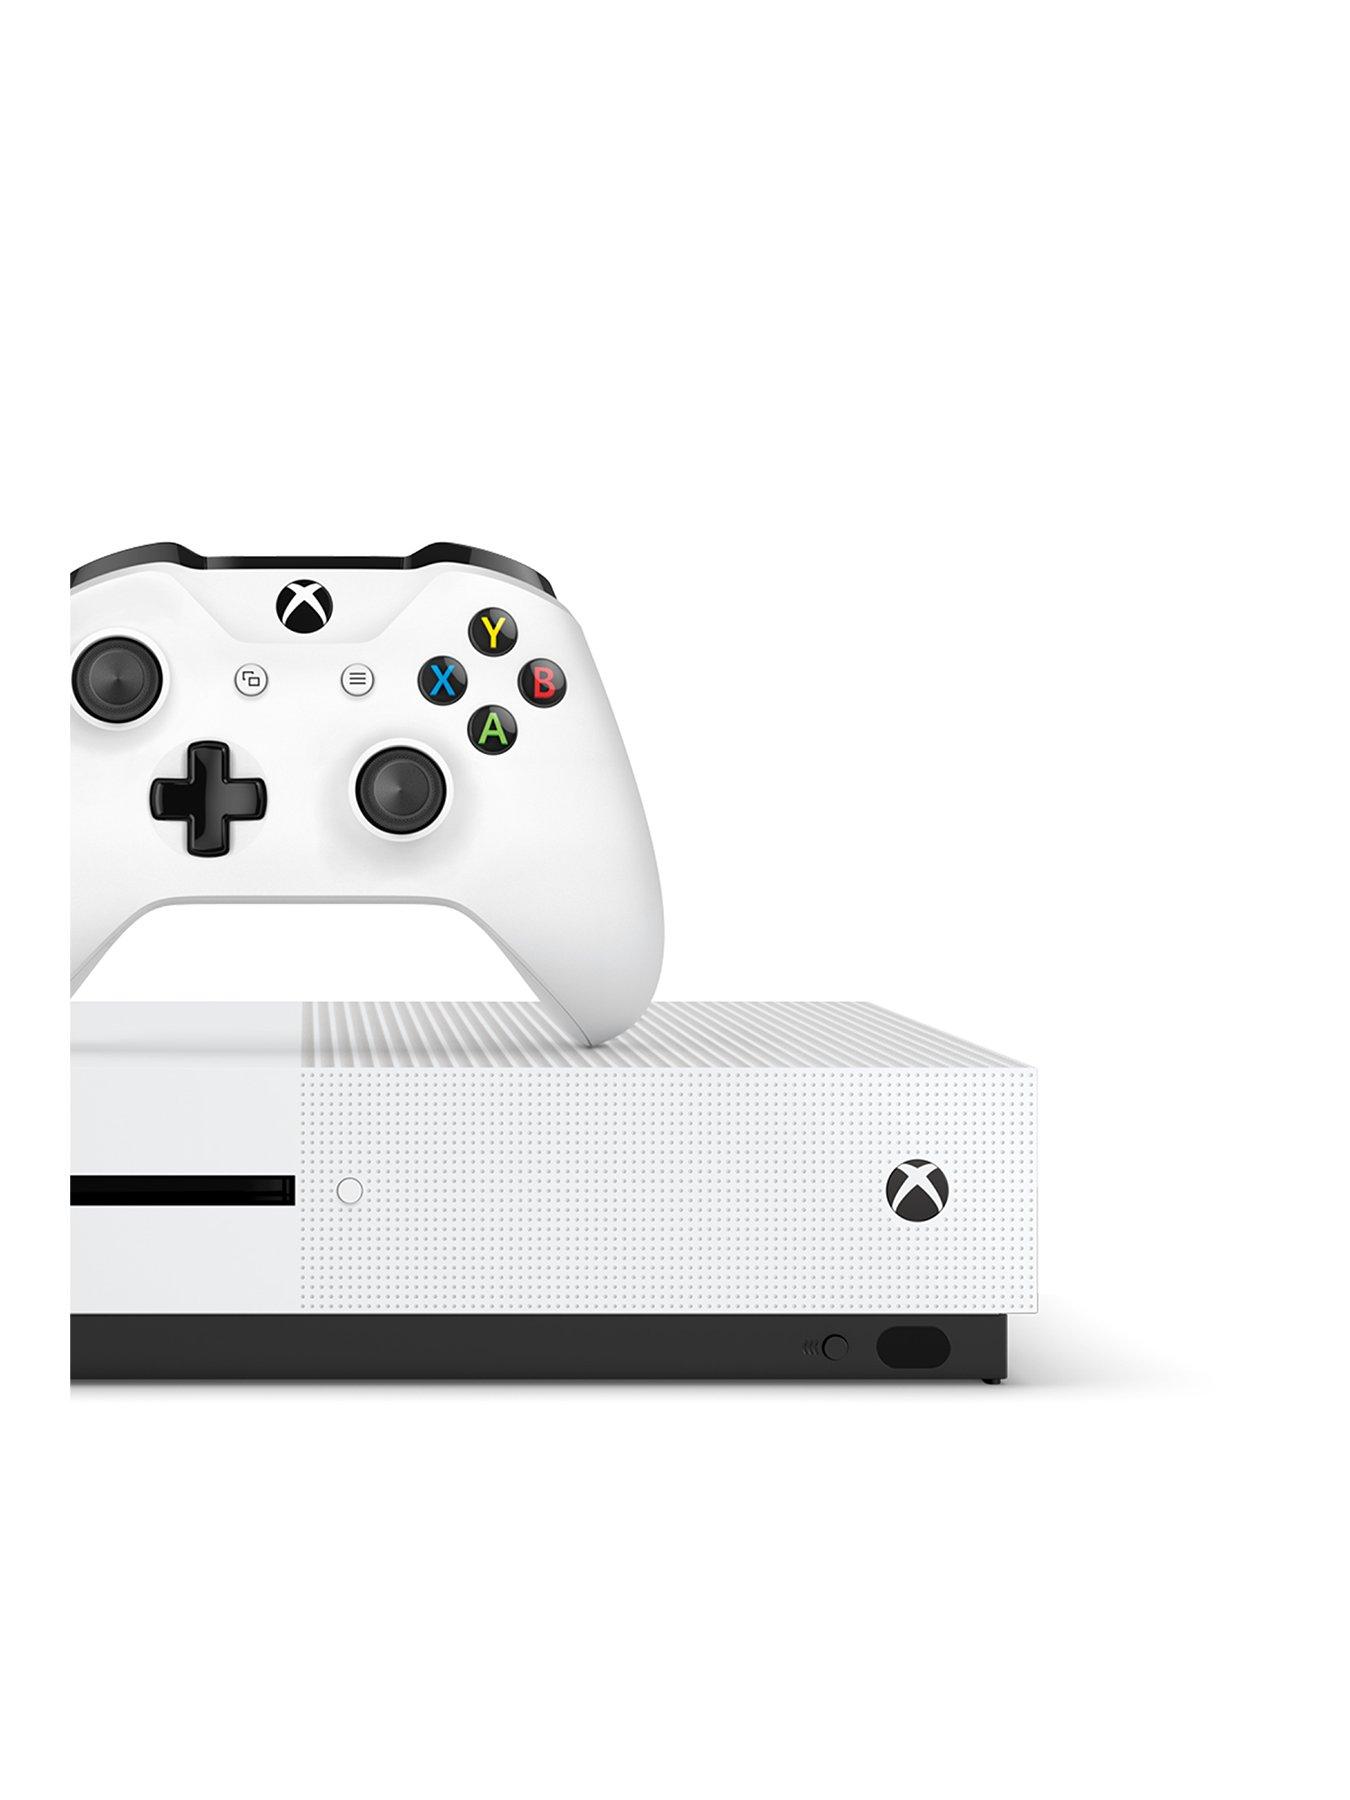 Xbox One Xbox One S, 1 white controller, GPU 1 month for £1 dash offer -  1TB Console | very.co.uk